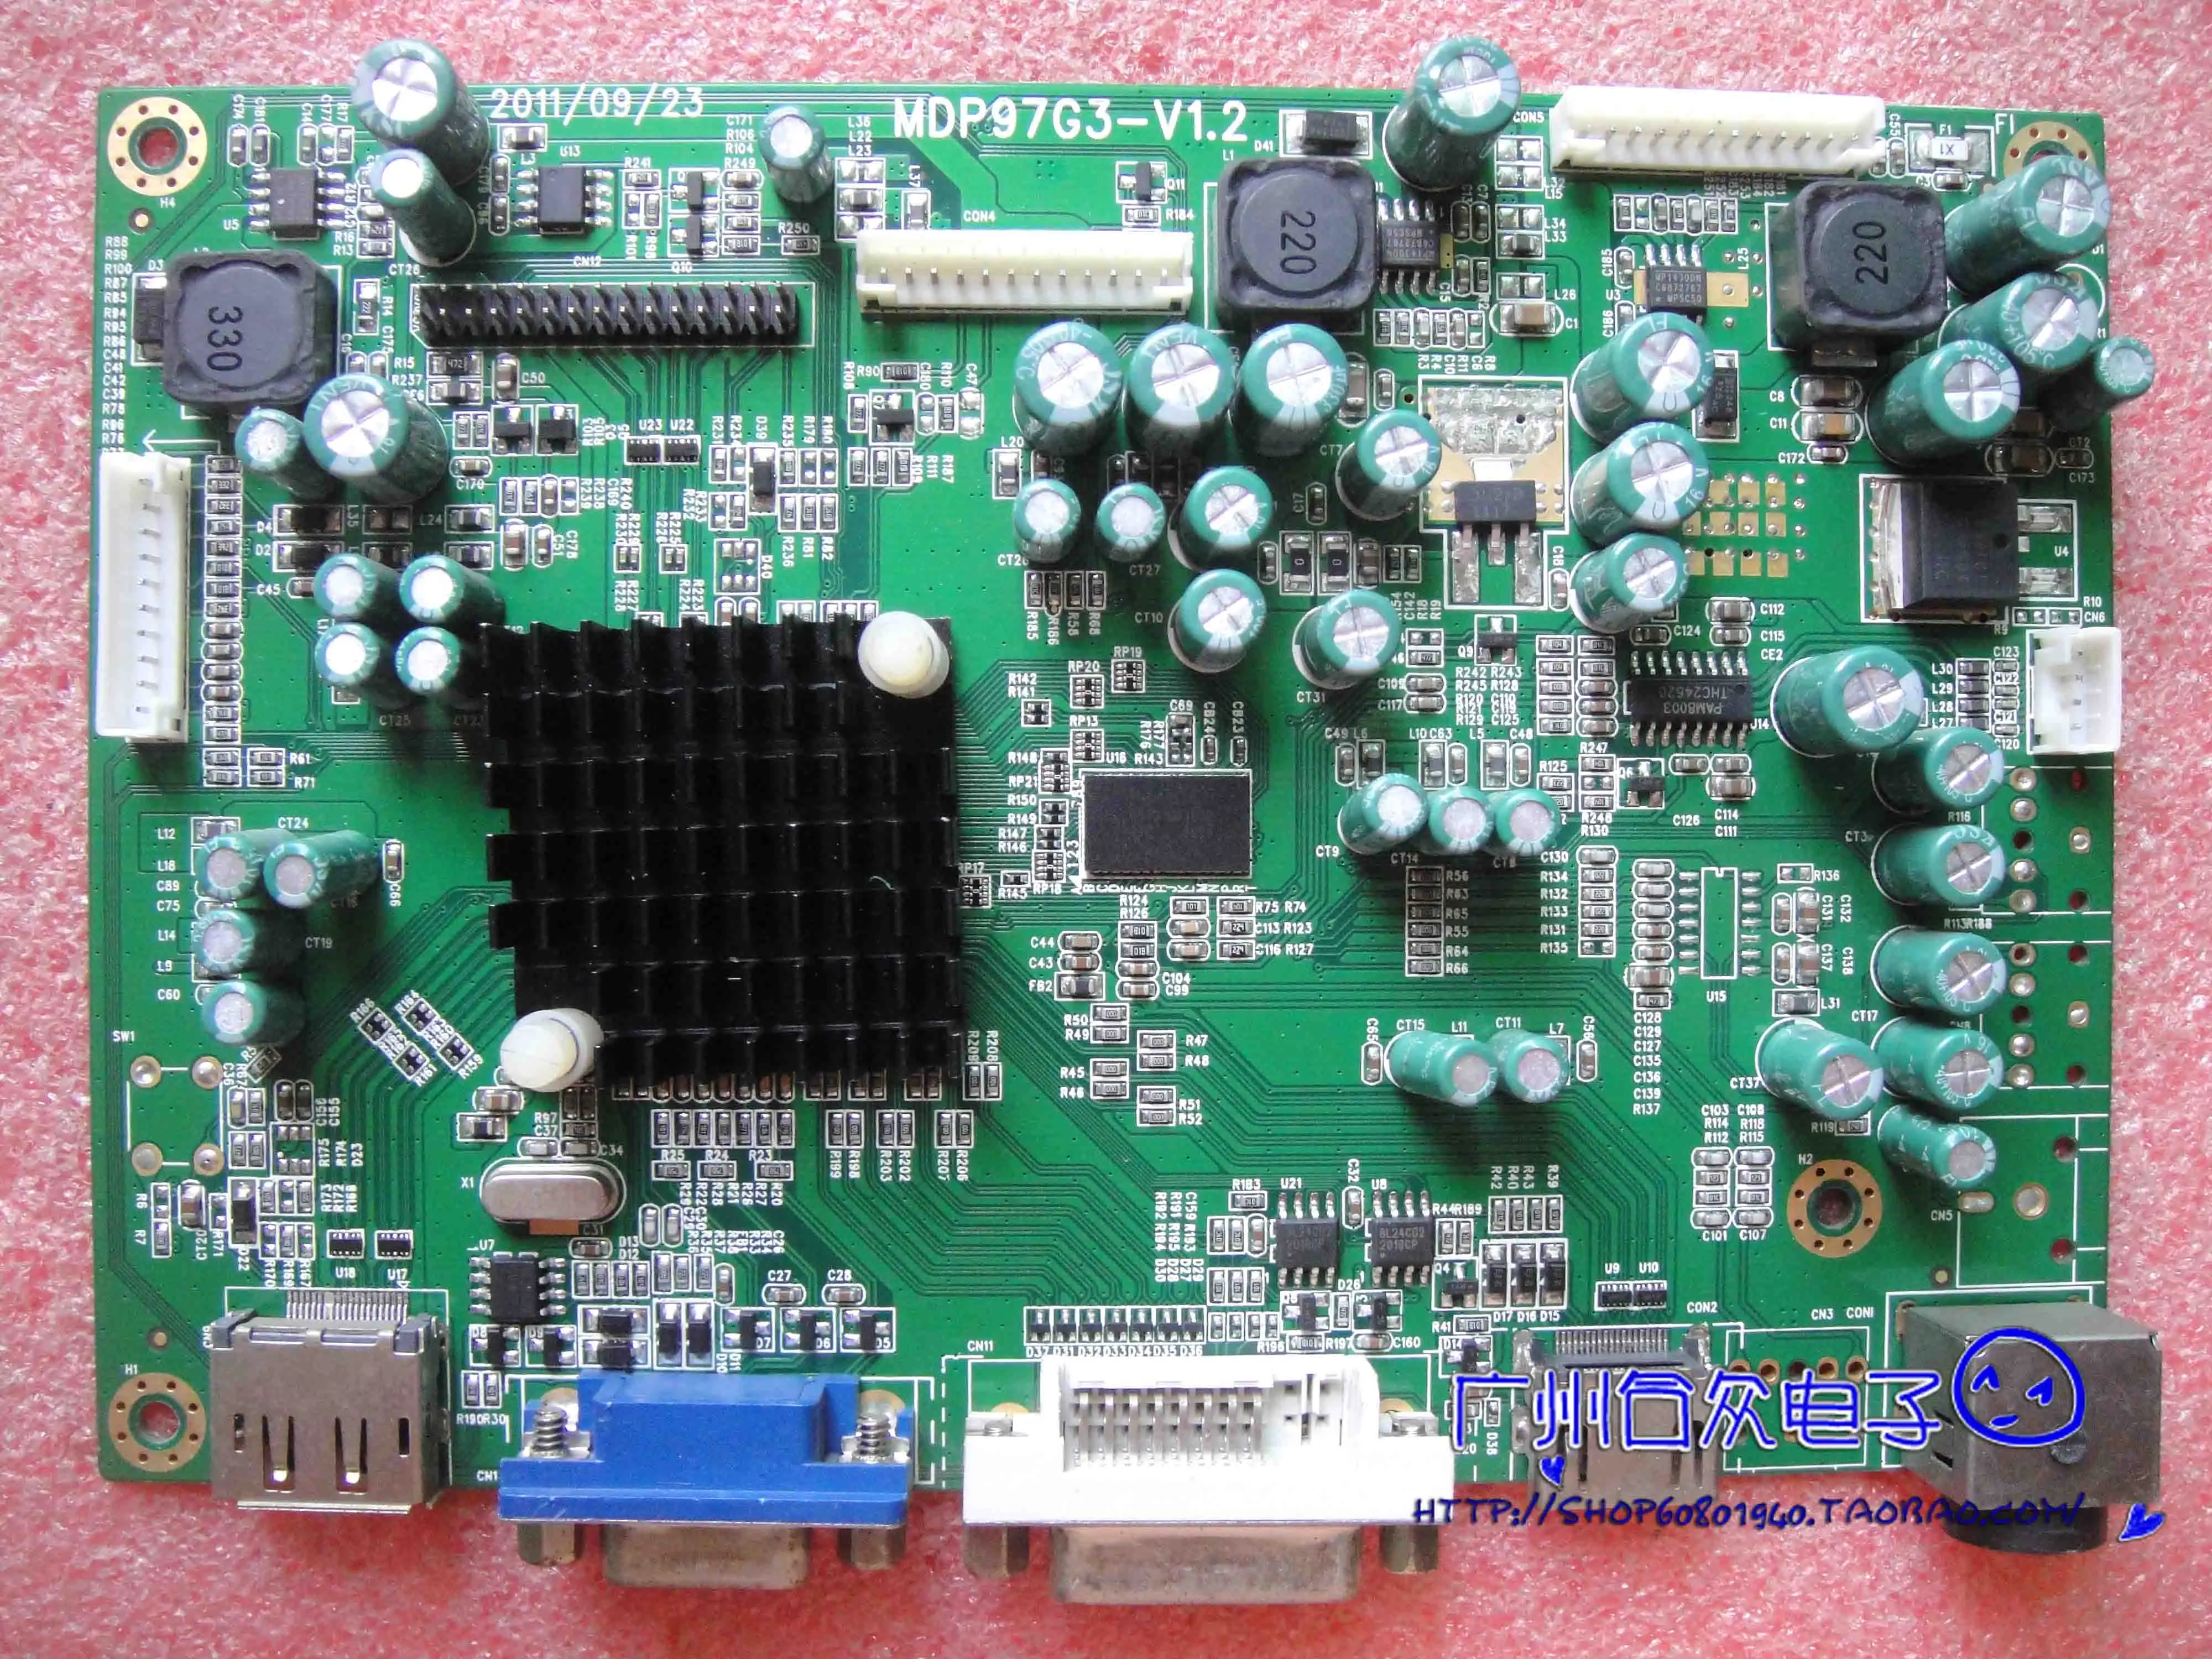 

T7000+ Driver Board 2723S Motherboard MDP97G3-V1.2 with second-hand LM270WQ1-SDF1